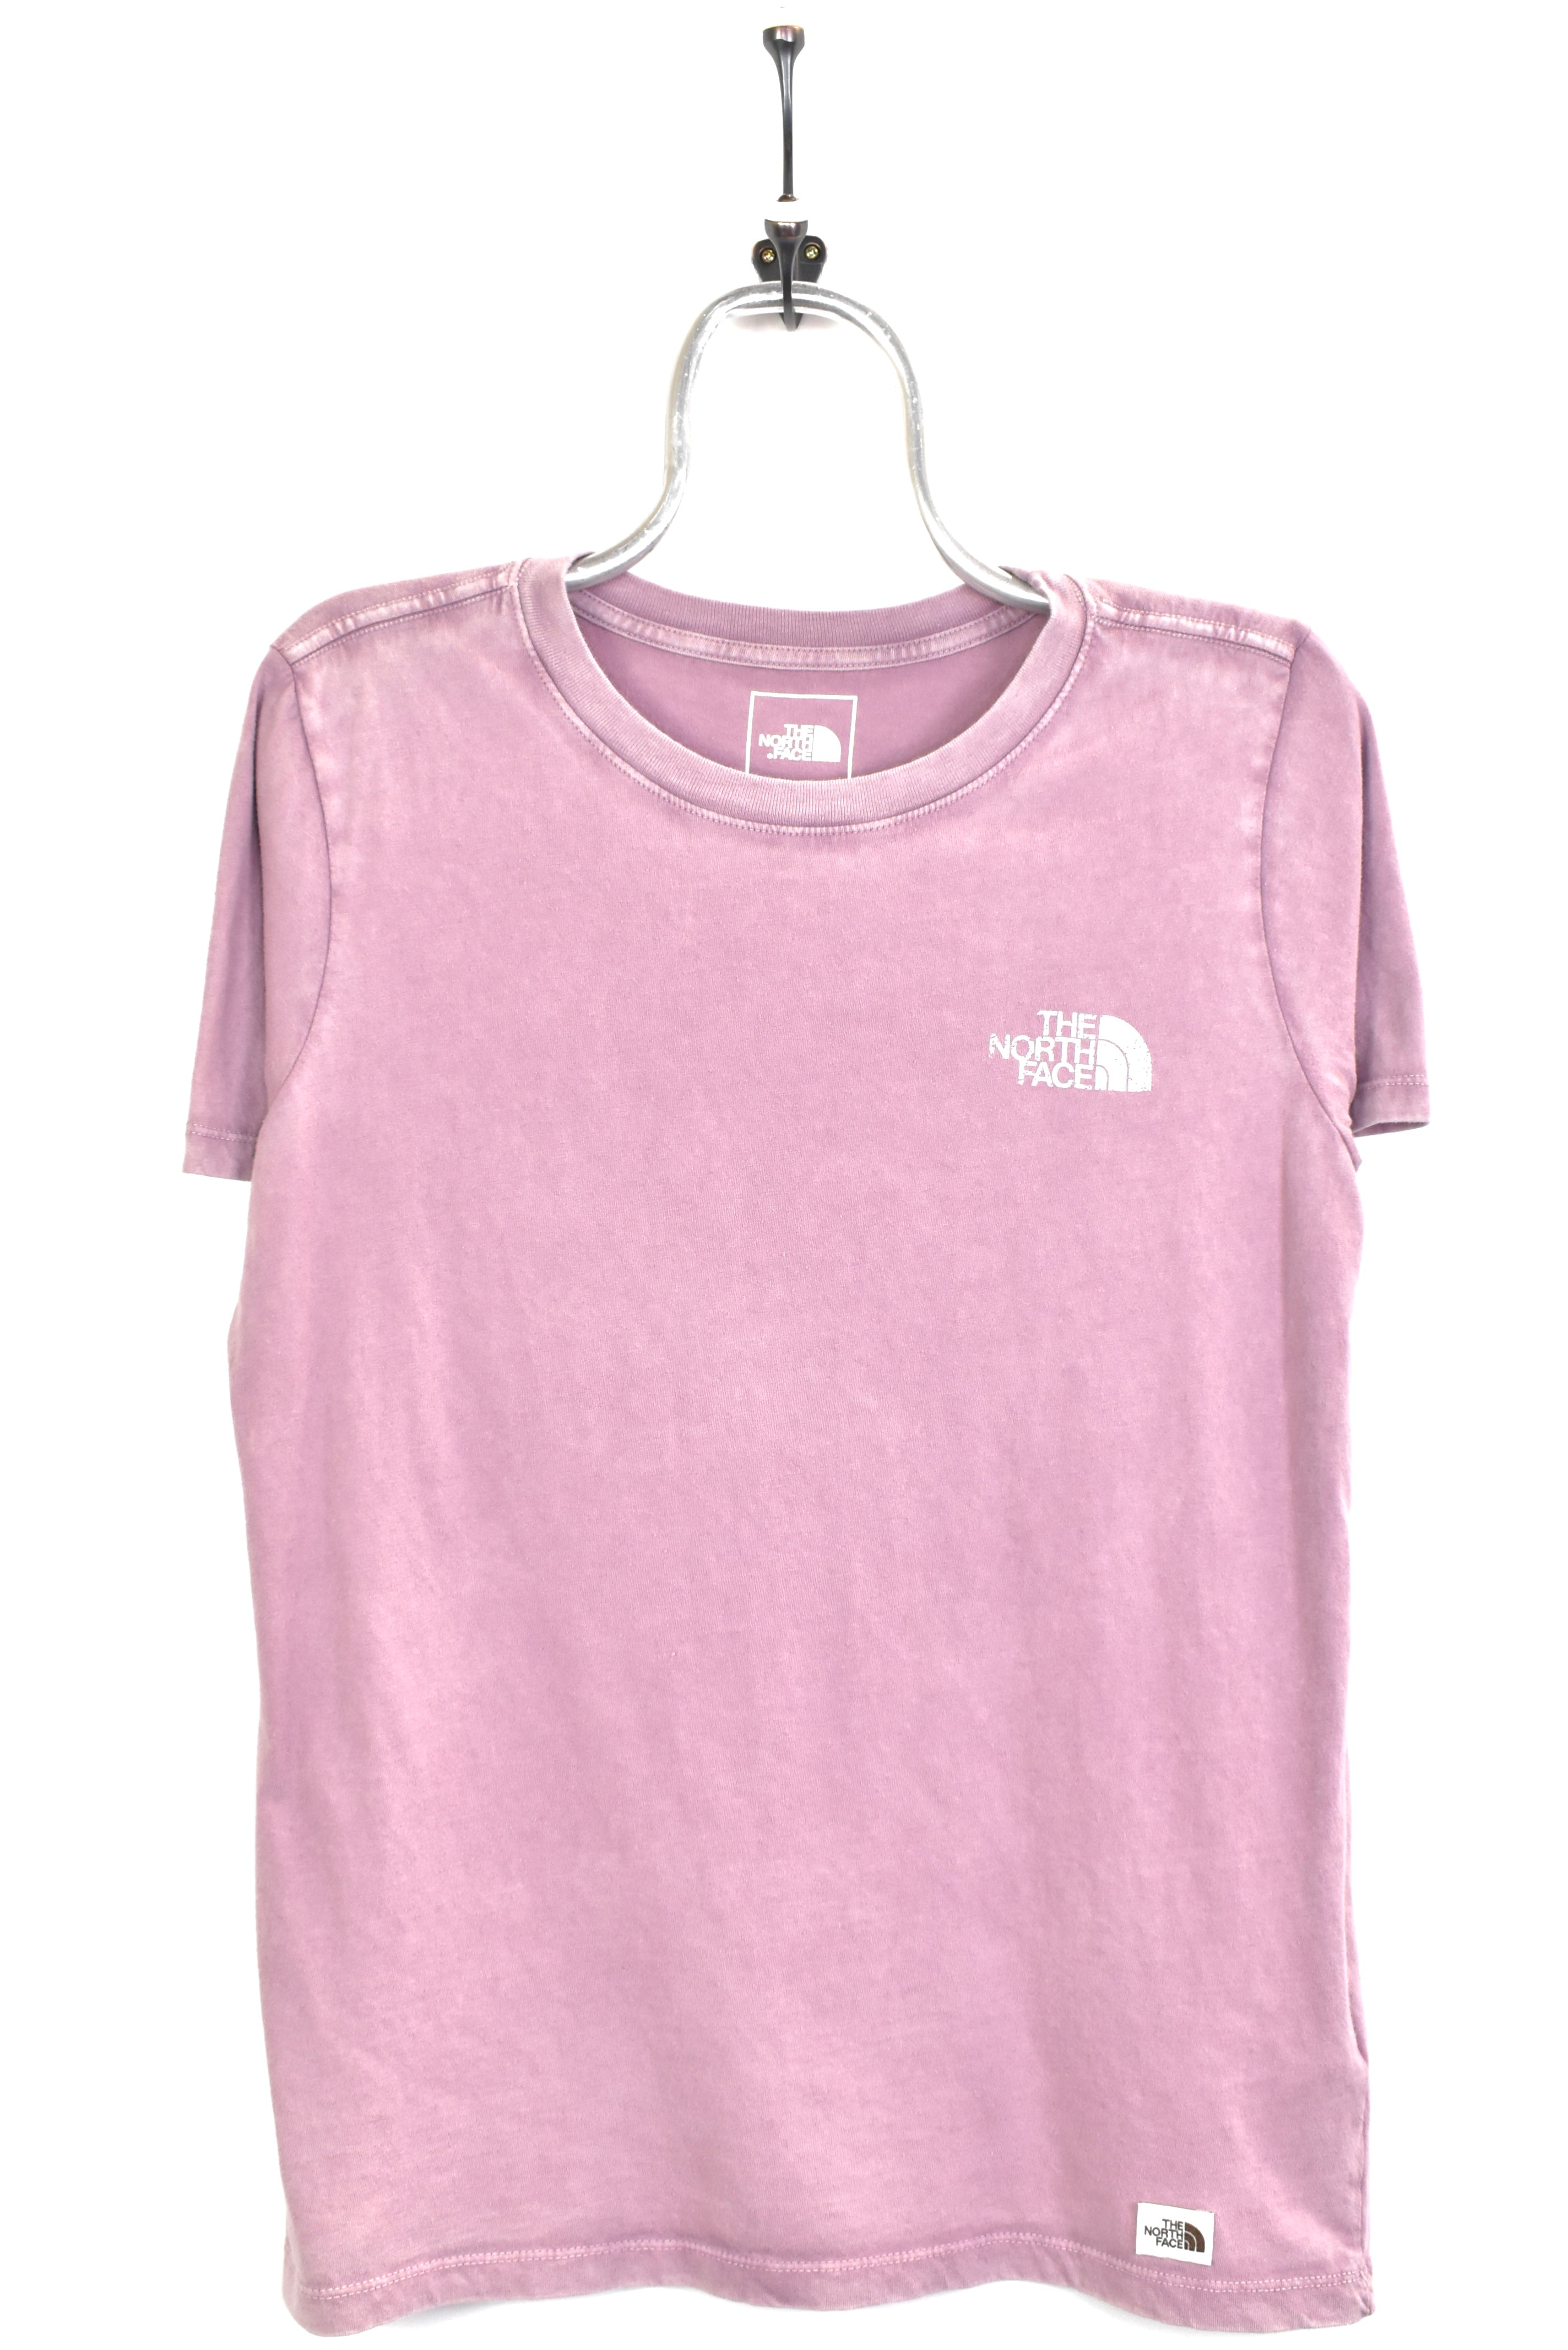 Vintage Women's The North Face purple t-shirt | Medium THE NORTH FACE